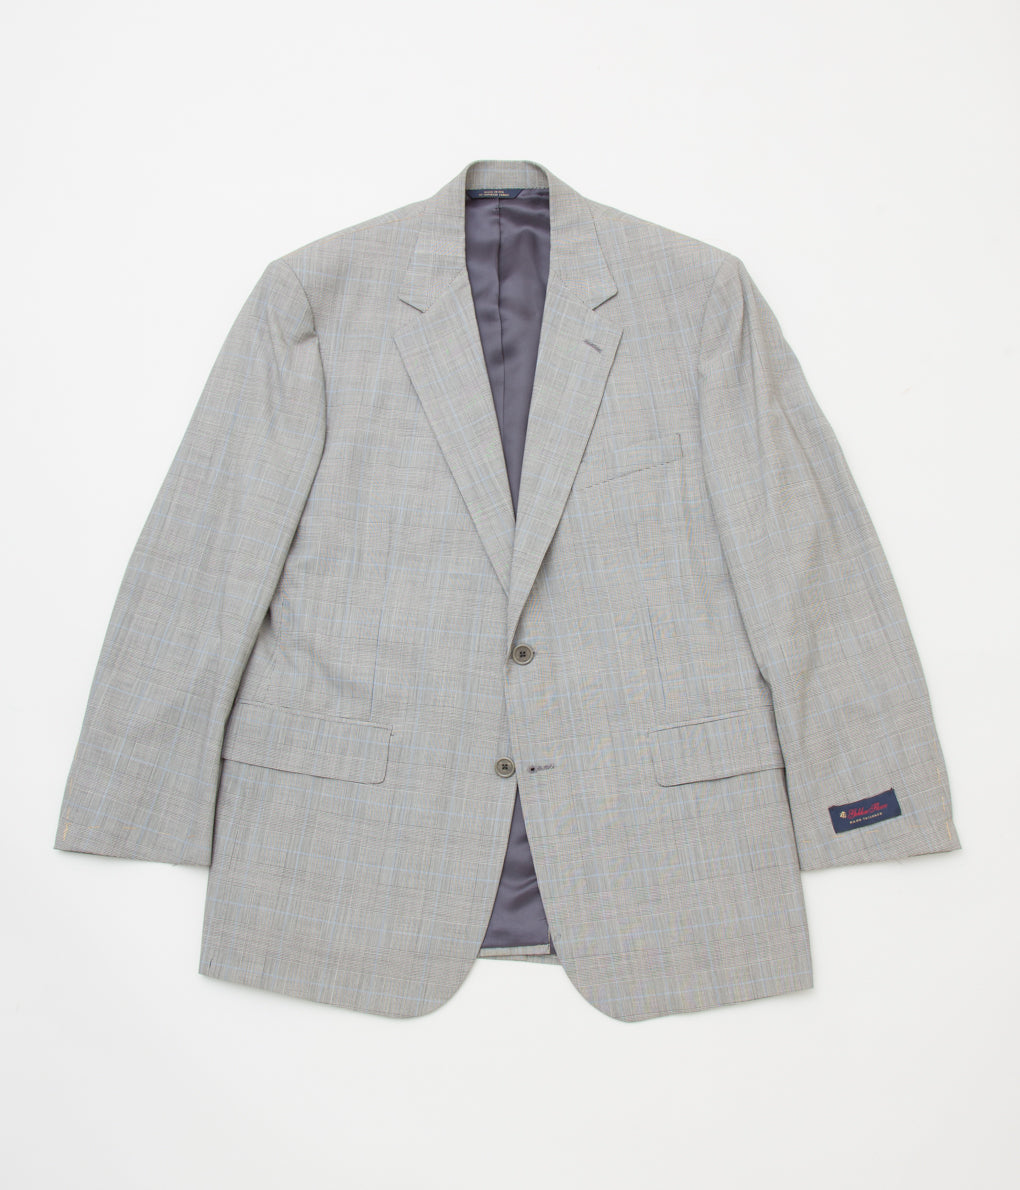 FROM USA "DEAD STOCK BROOKS BROTHERS WOOL GLEN CHECK SUITS"(LT GRAY/BLUE)